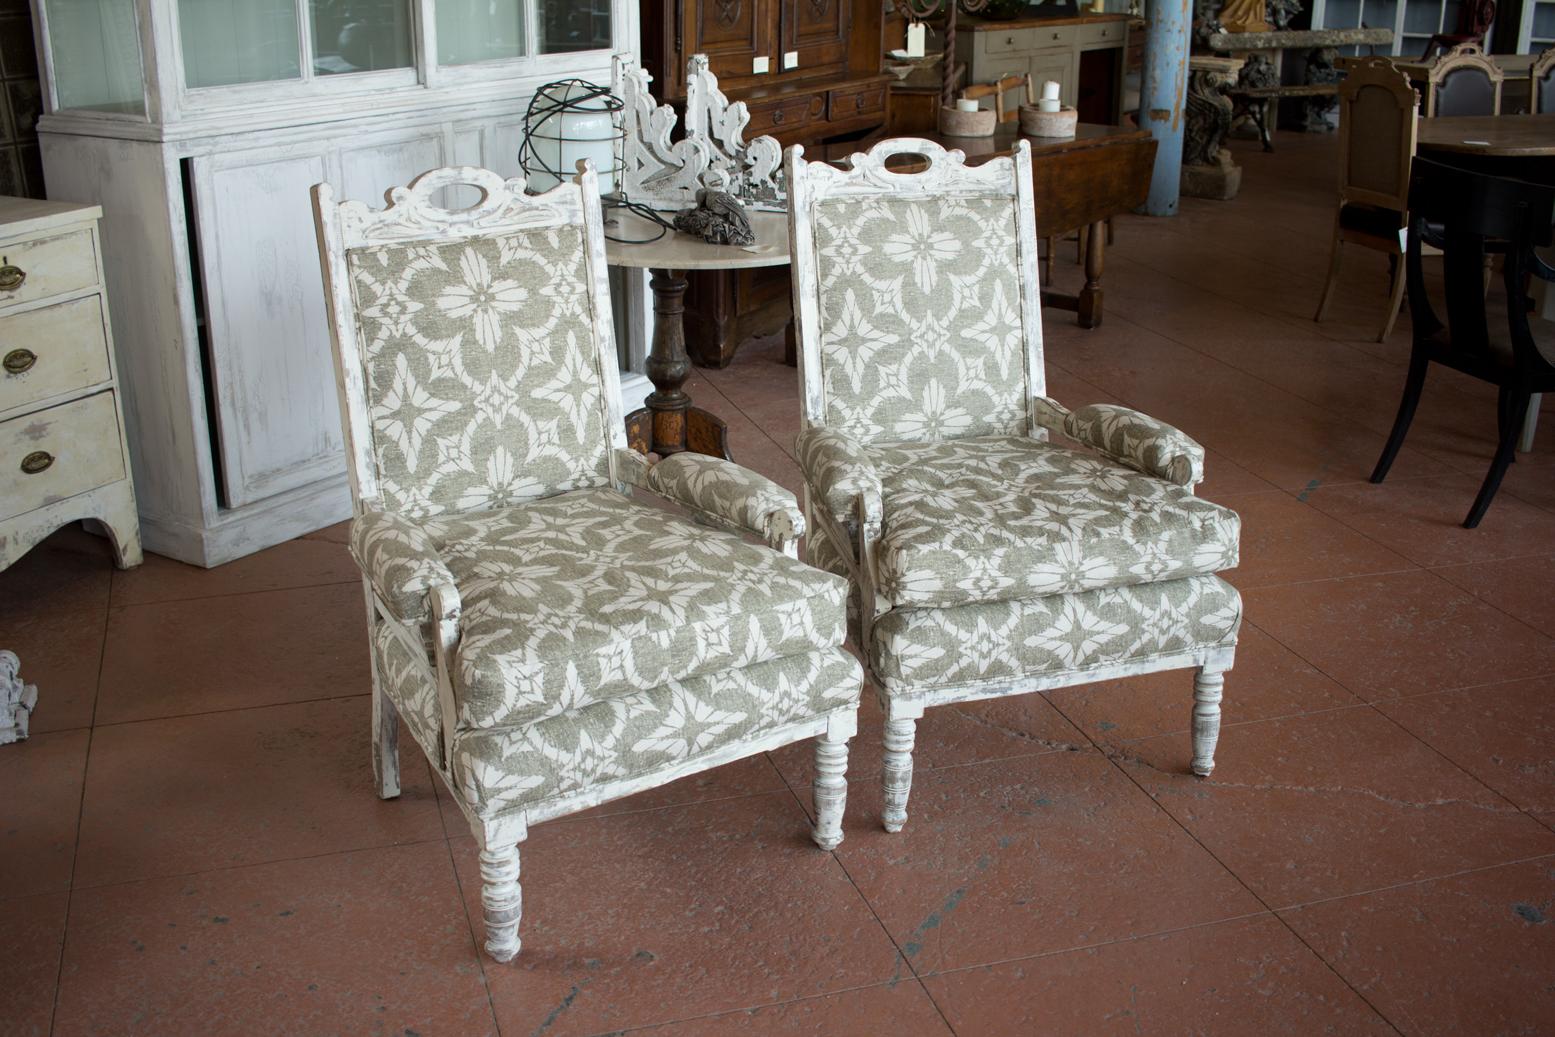 Pair of English Edwardian early 20th century distressed white painted oak framed library chairs. They are newly upholstered in linen/cotton fabric. Would look great in any room and stunning on a porch. Very comfortable.